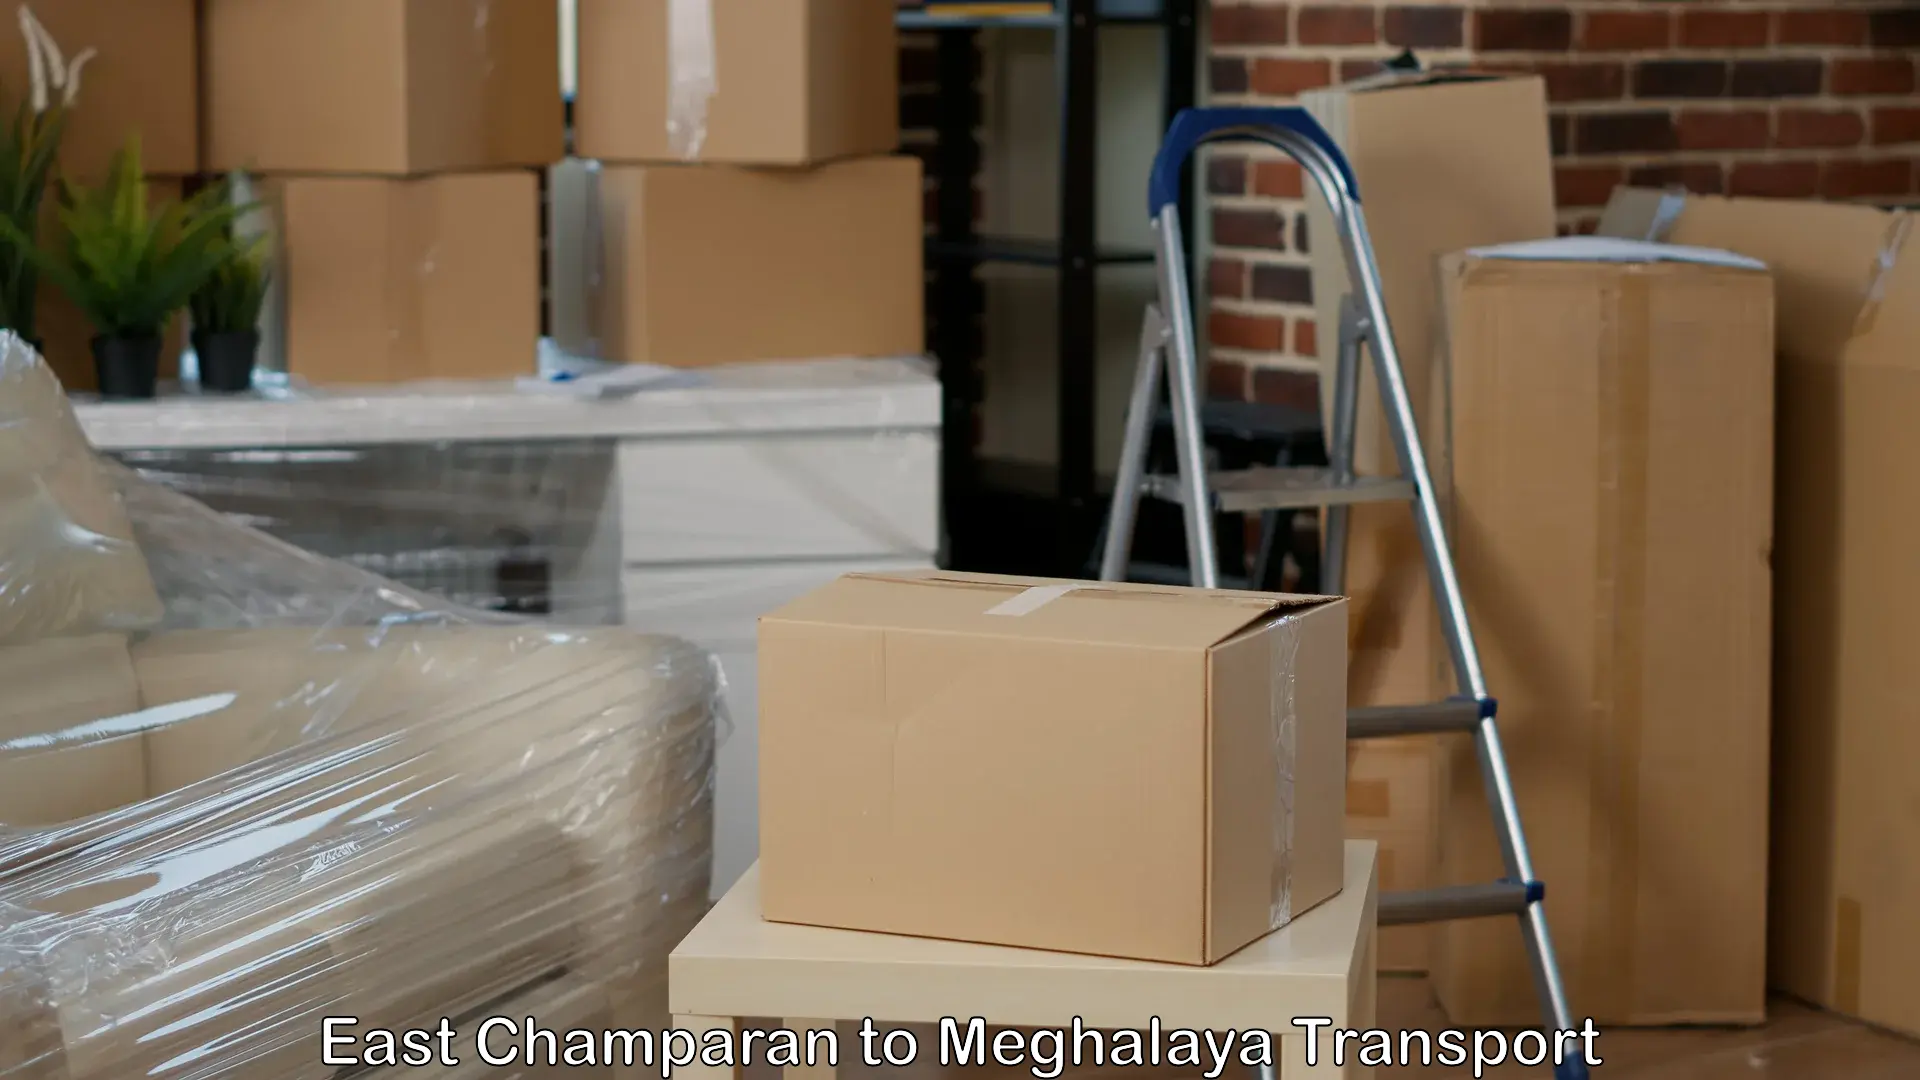 Container transport service East Champaran to Meghalaya